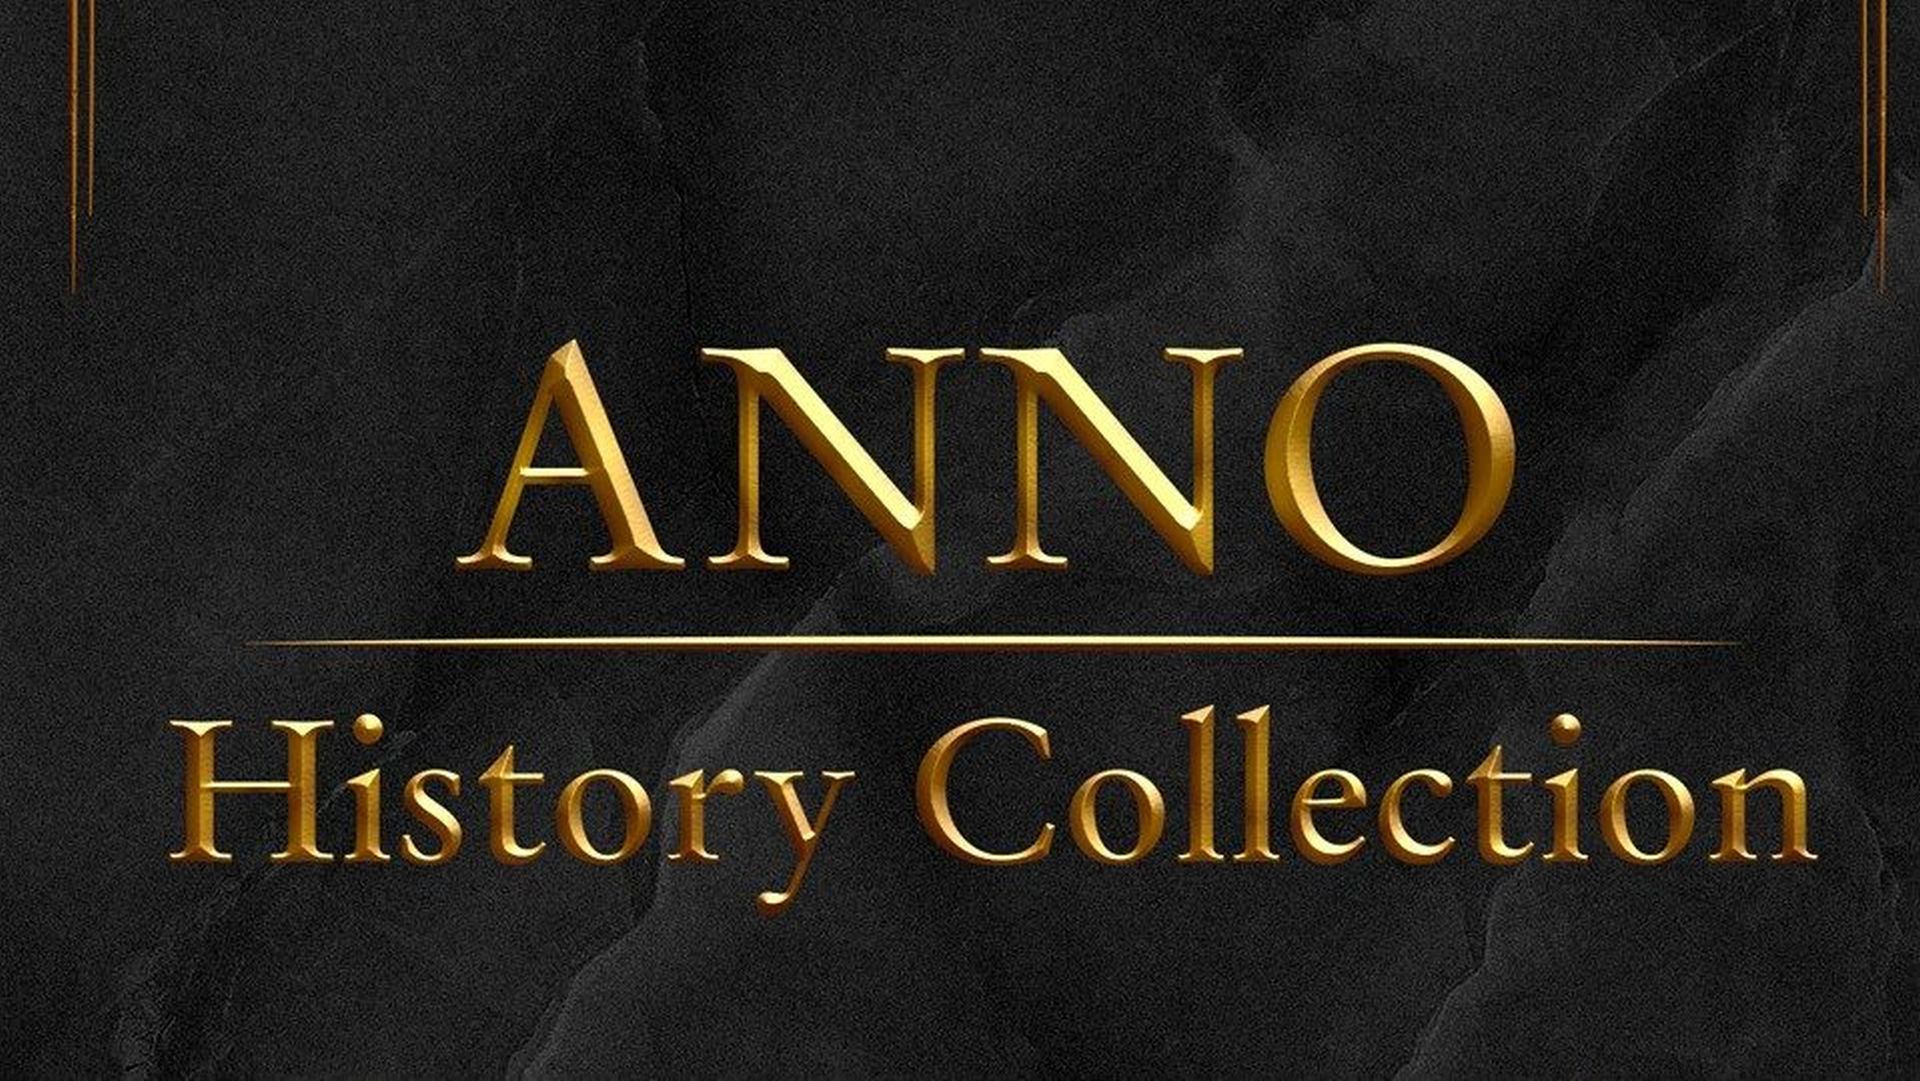 With Classic 4 4K History Contains Announced, Anno Support Titles Collection